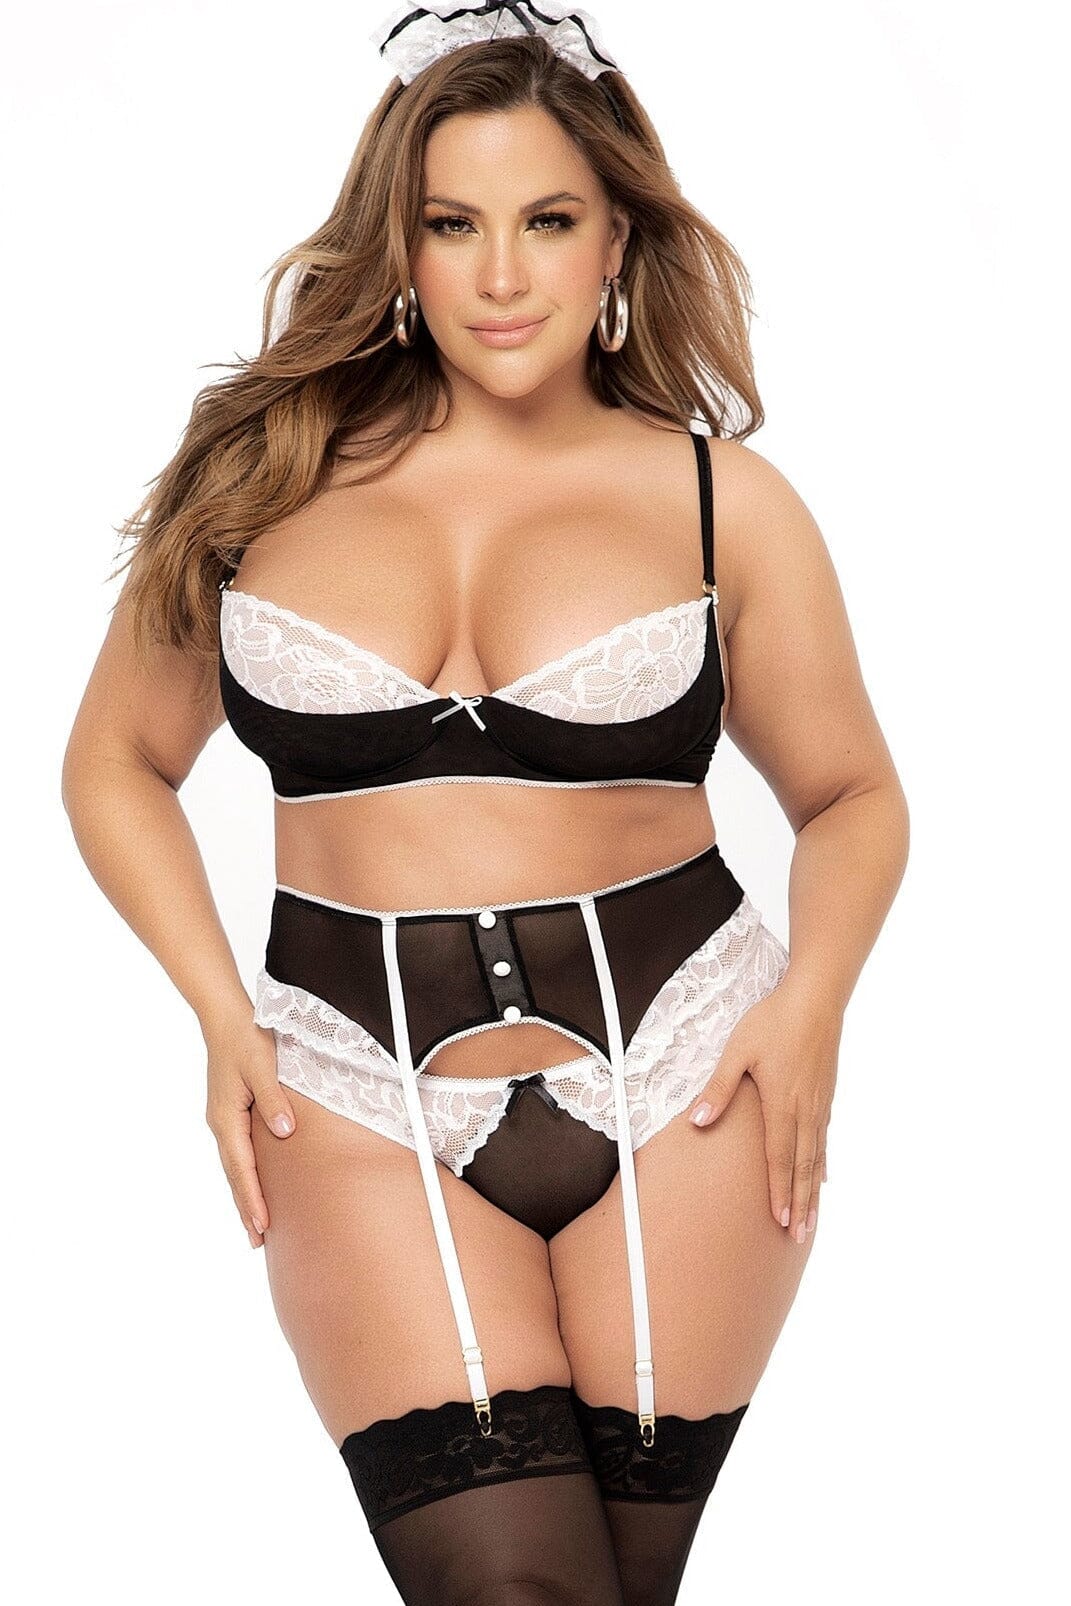 Plus Size Sexy French Maid Costume-Fantasy Lingerie-Mapale-Black-1/2X-SEXYSHOES.COM